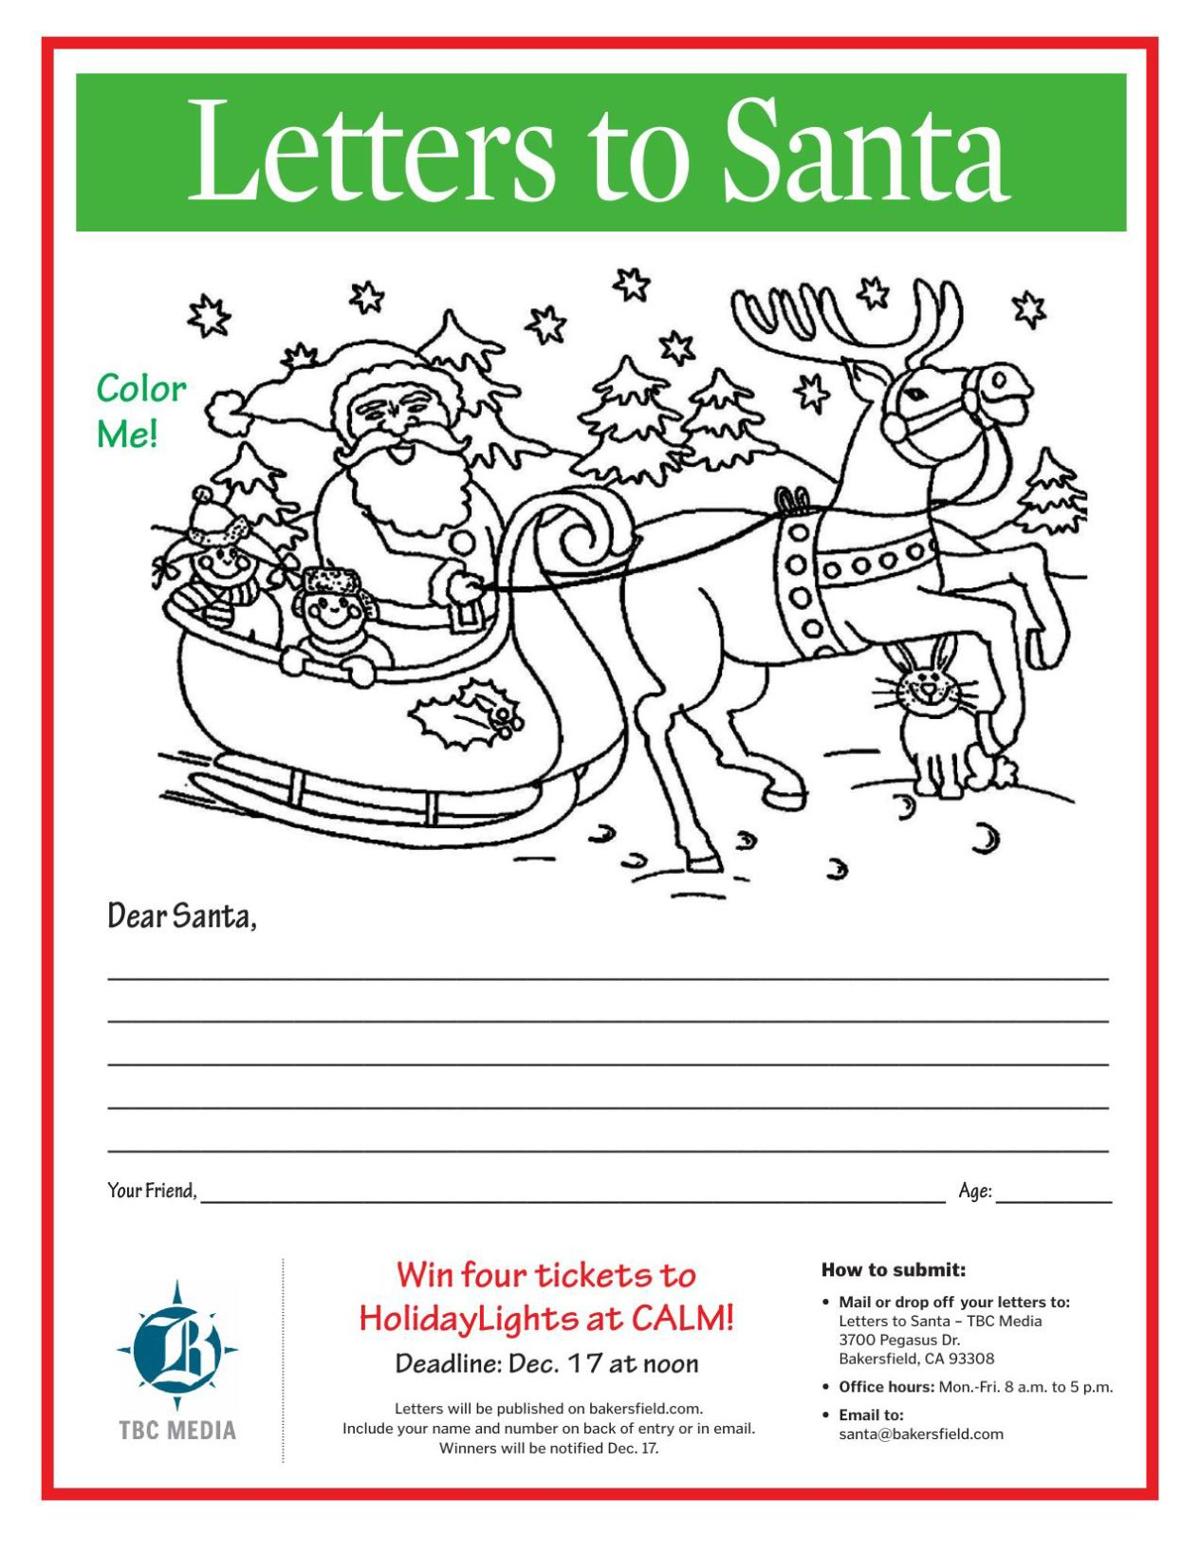 Send Us Your Letter To Santa For A Chance To Win Tickets To Holiday Lights At Calm Bakersfield Com